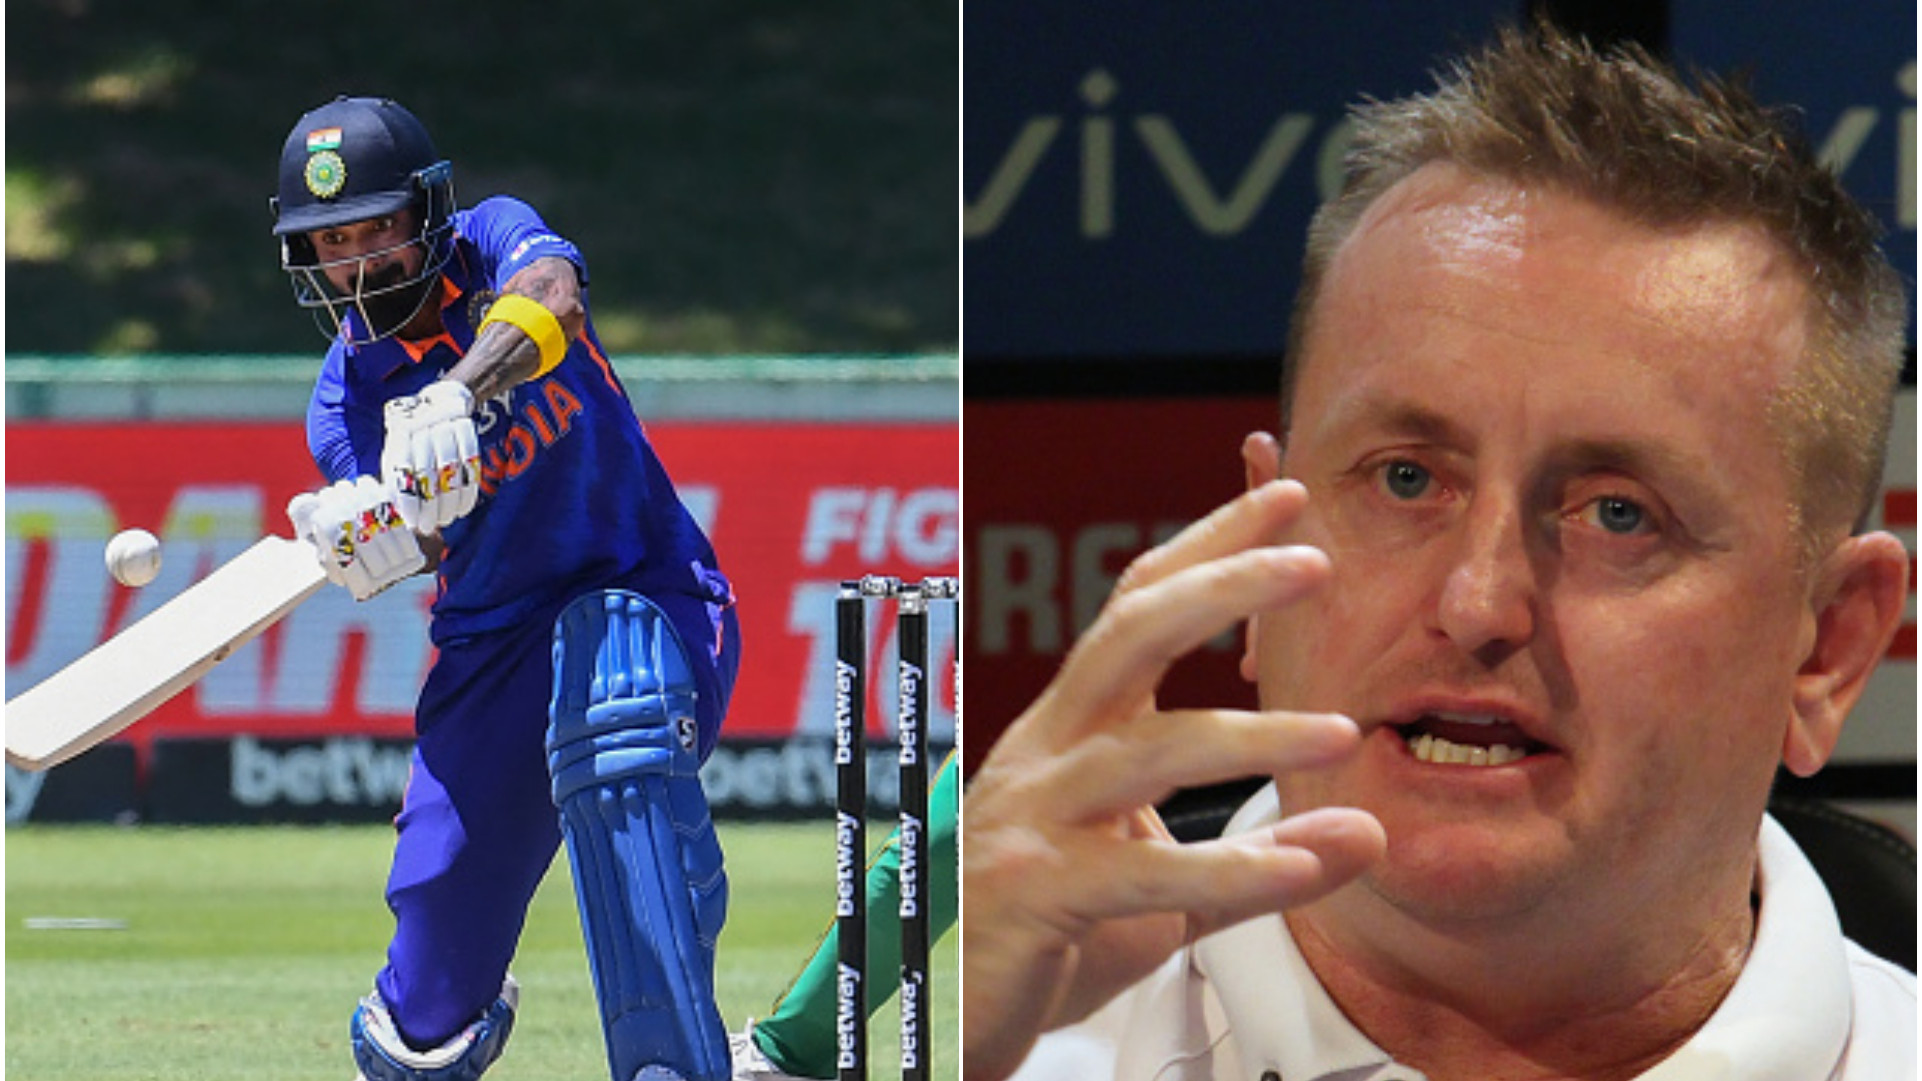 “KL Rahul has missed a lot of cricket, a lot of question marks now present themselves” opines Scott Styris